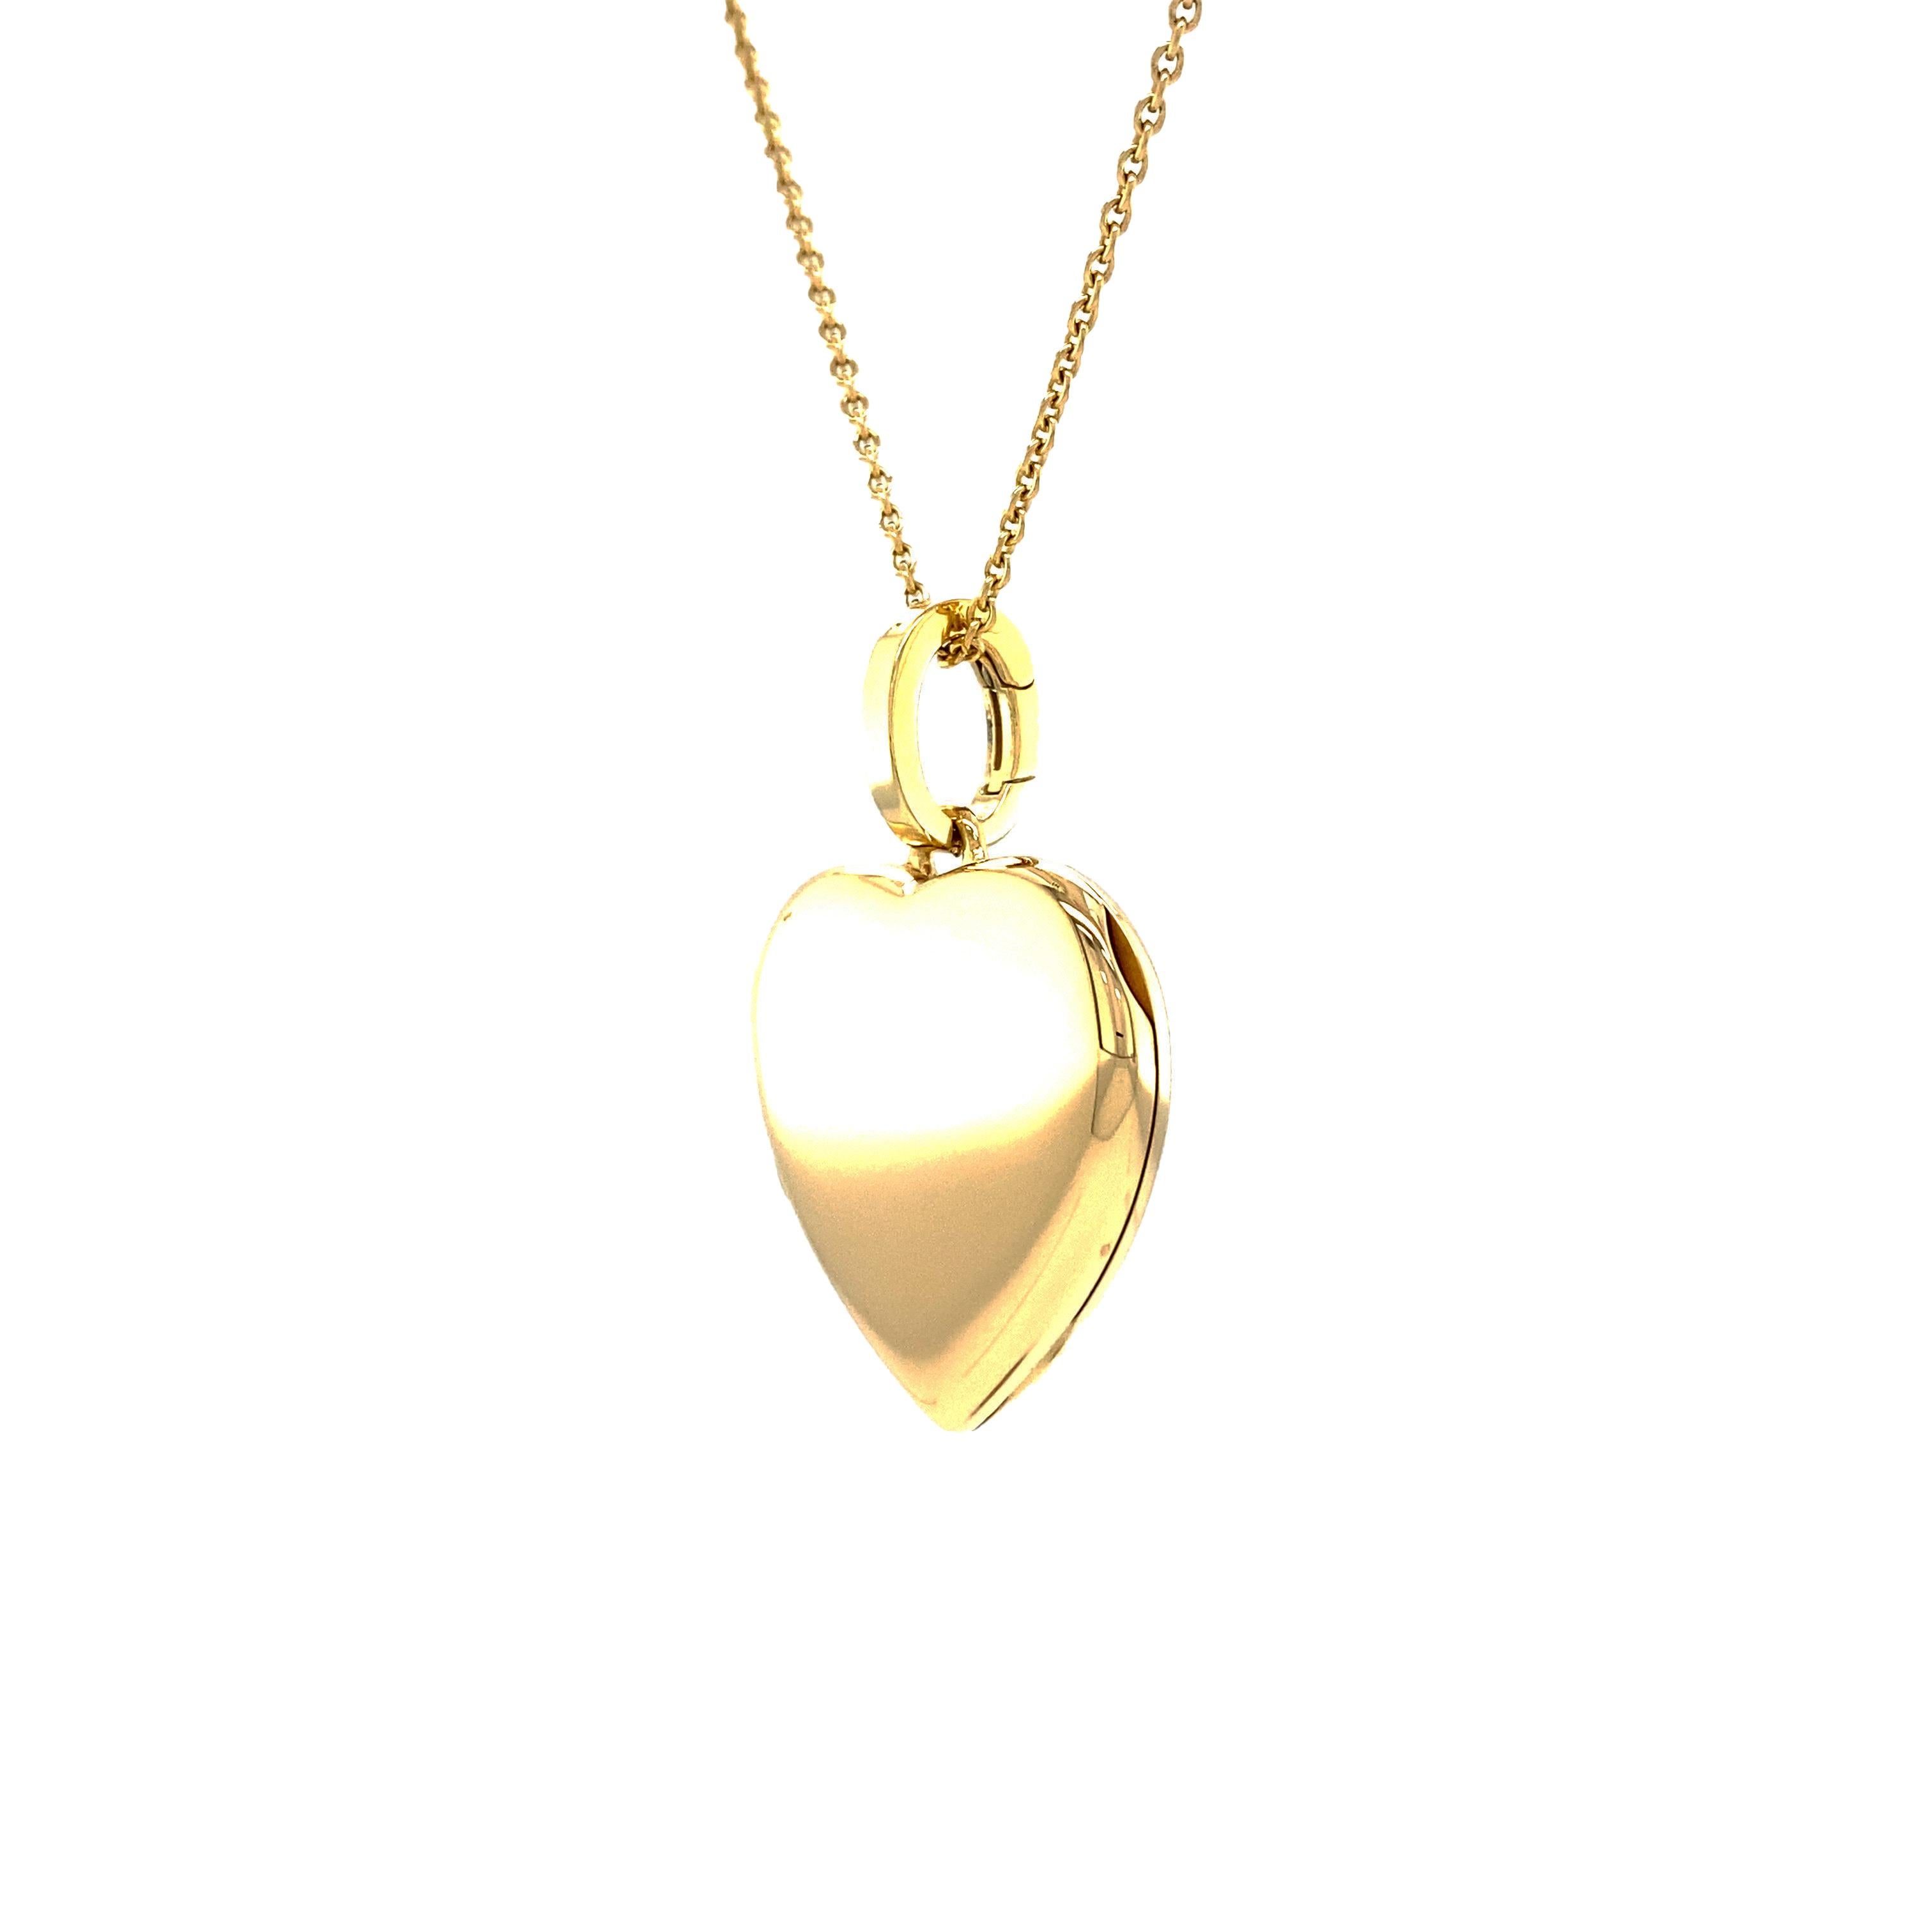 Customizable Polished Heart Shaped Locket Pendant 18k Yellow Gold 23 mm x 25 mm In New Condition For Sale In Pforzheim, DE